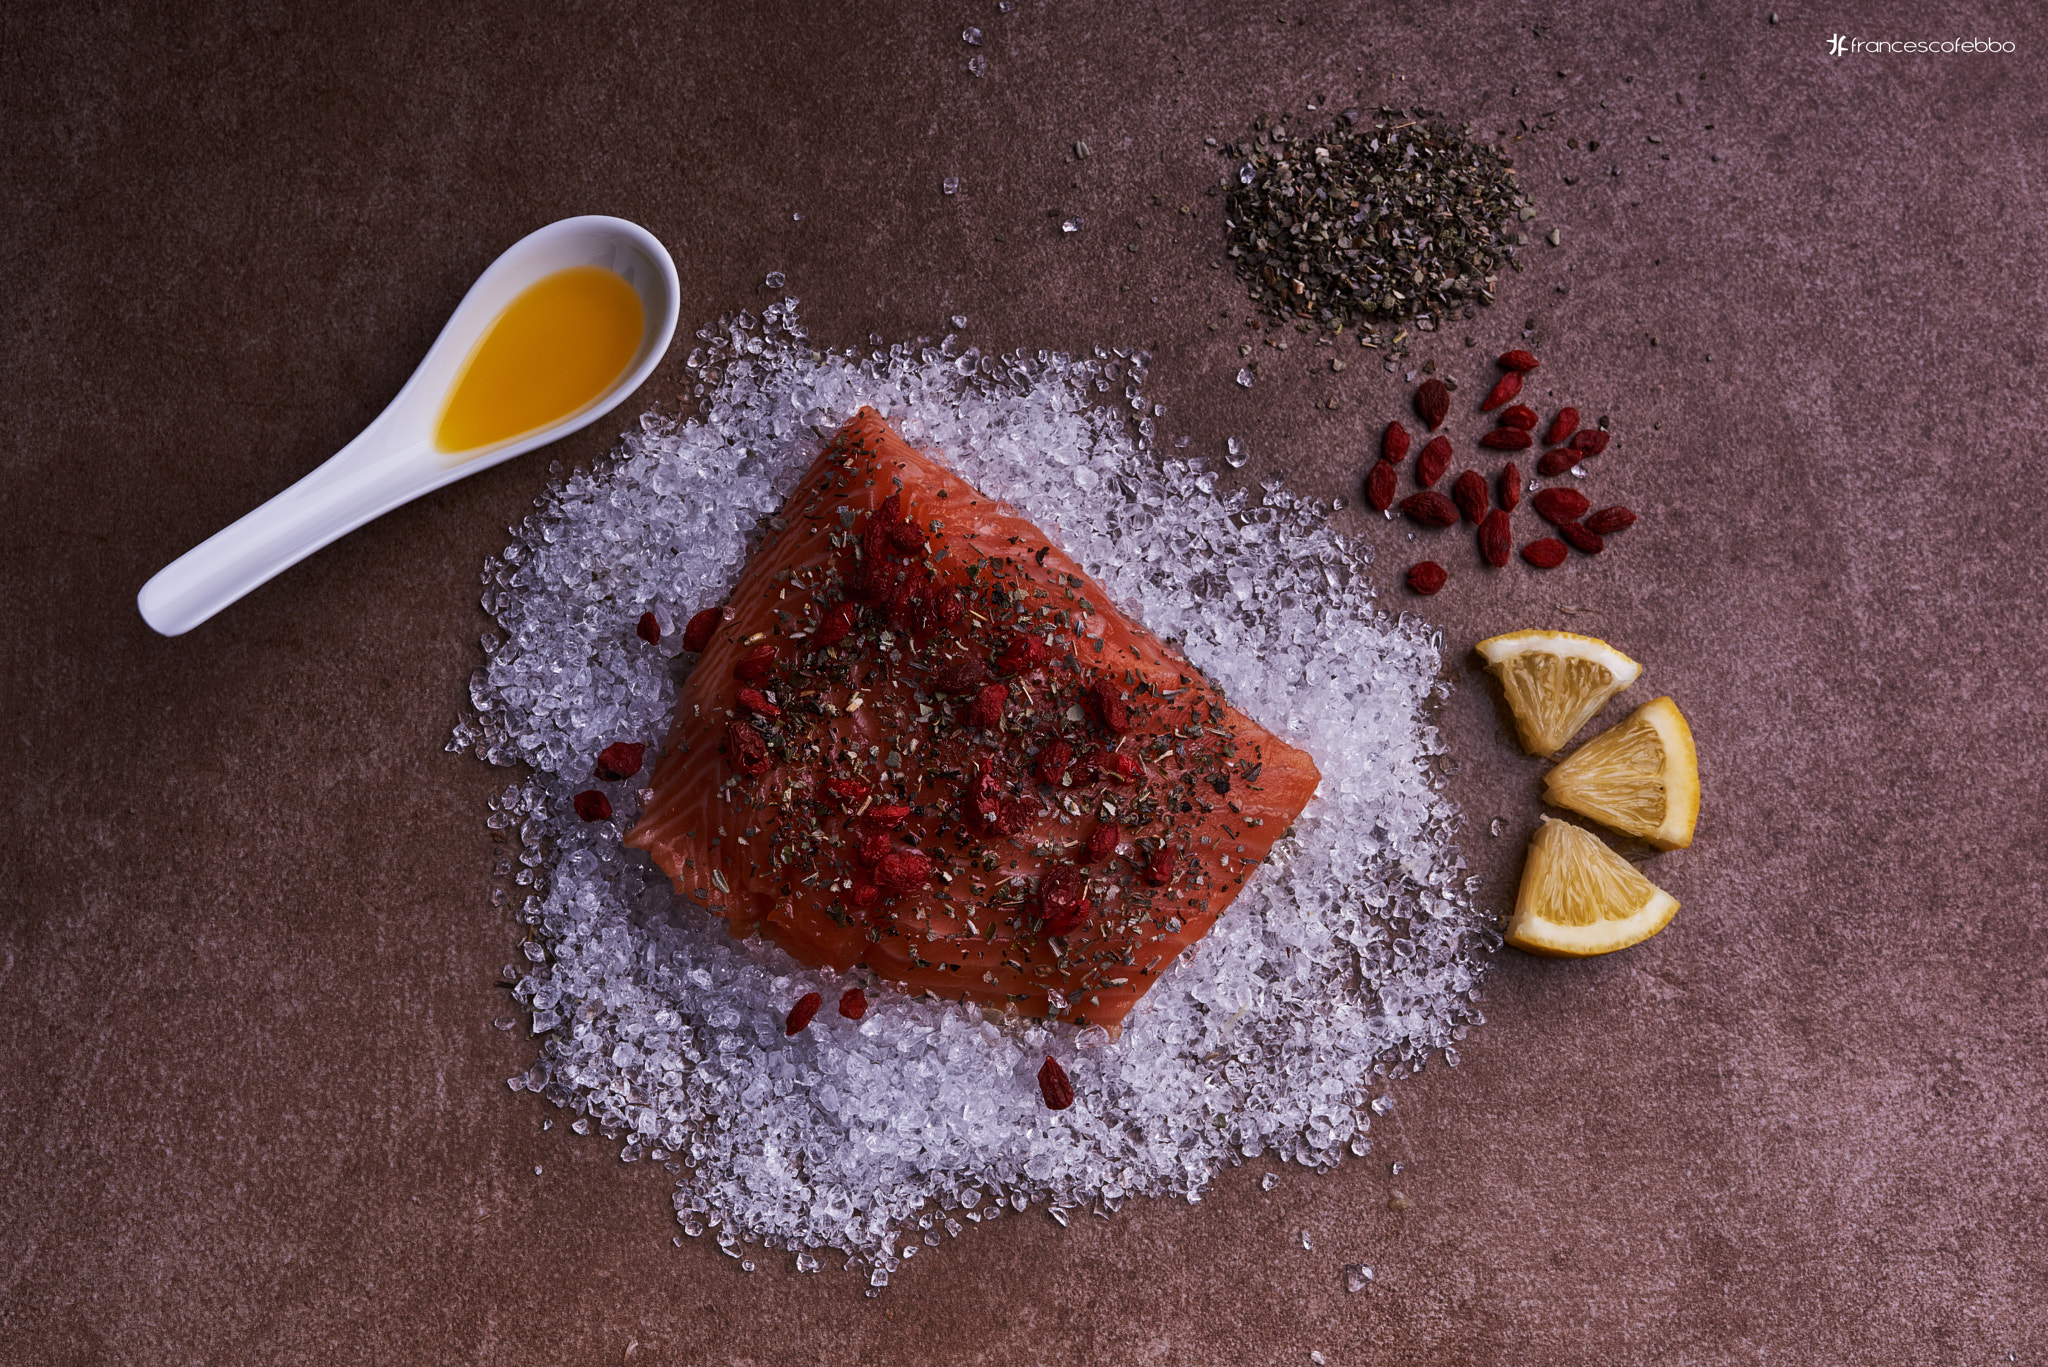 Sigma 35mm F1.4 DG HSM Art sample photo. Raw salmon and spice photography